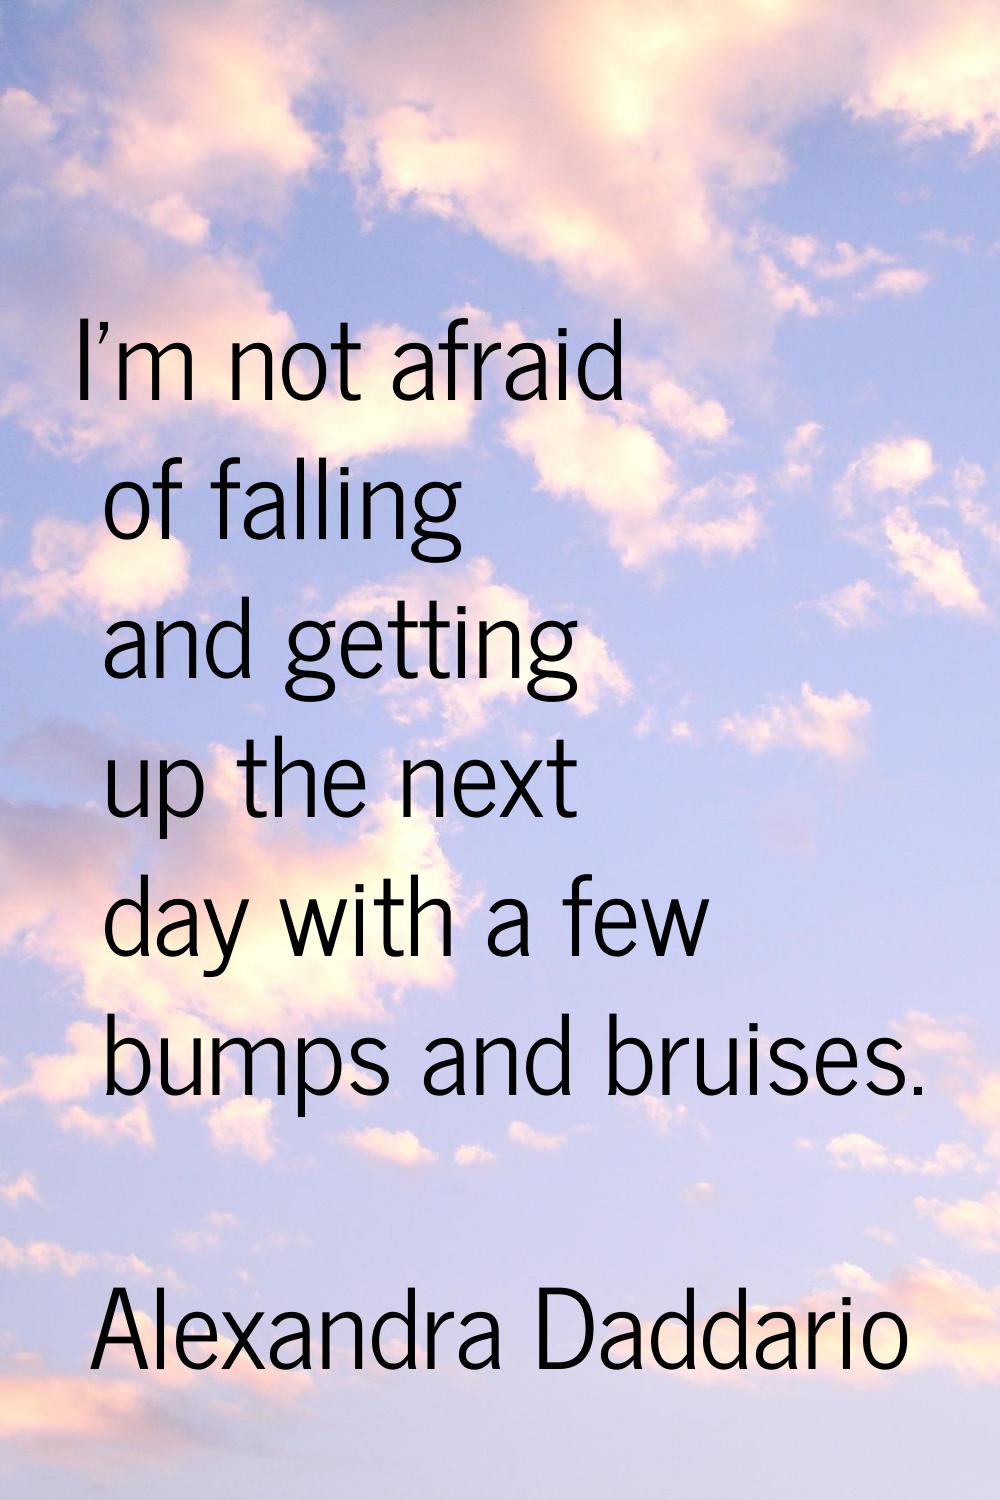 I'm not afraid of falling and getting up the next day with a few bumps and bruises.